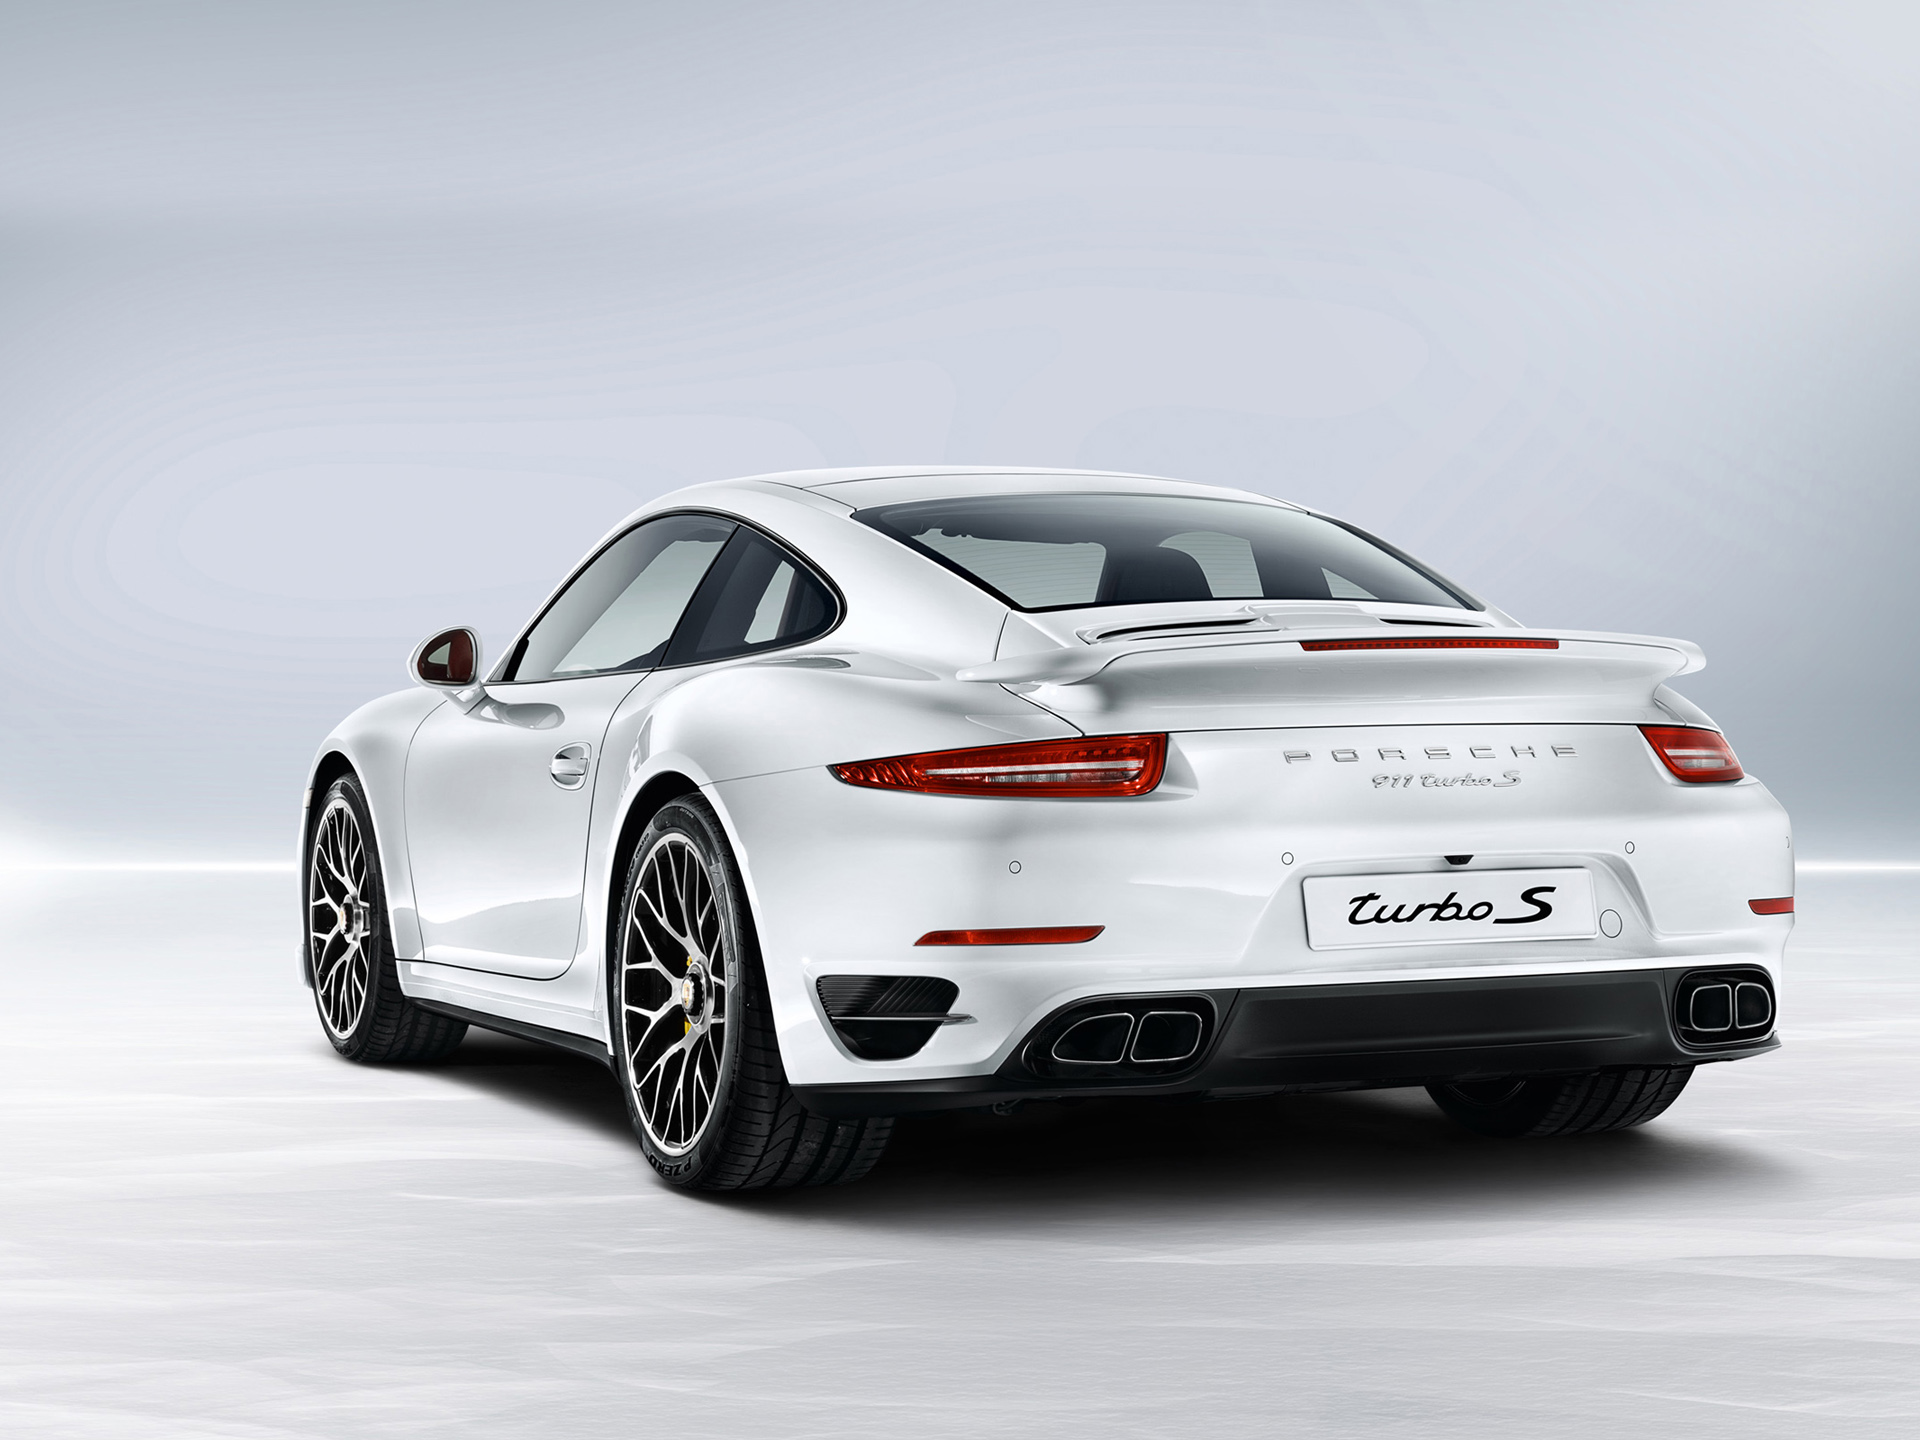 Download Porsche 911 Turbo S wallpapers for mobile phone free Porsche  911 Turbo S HD pictures